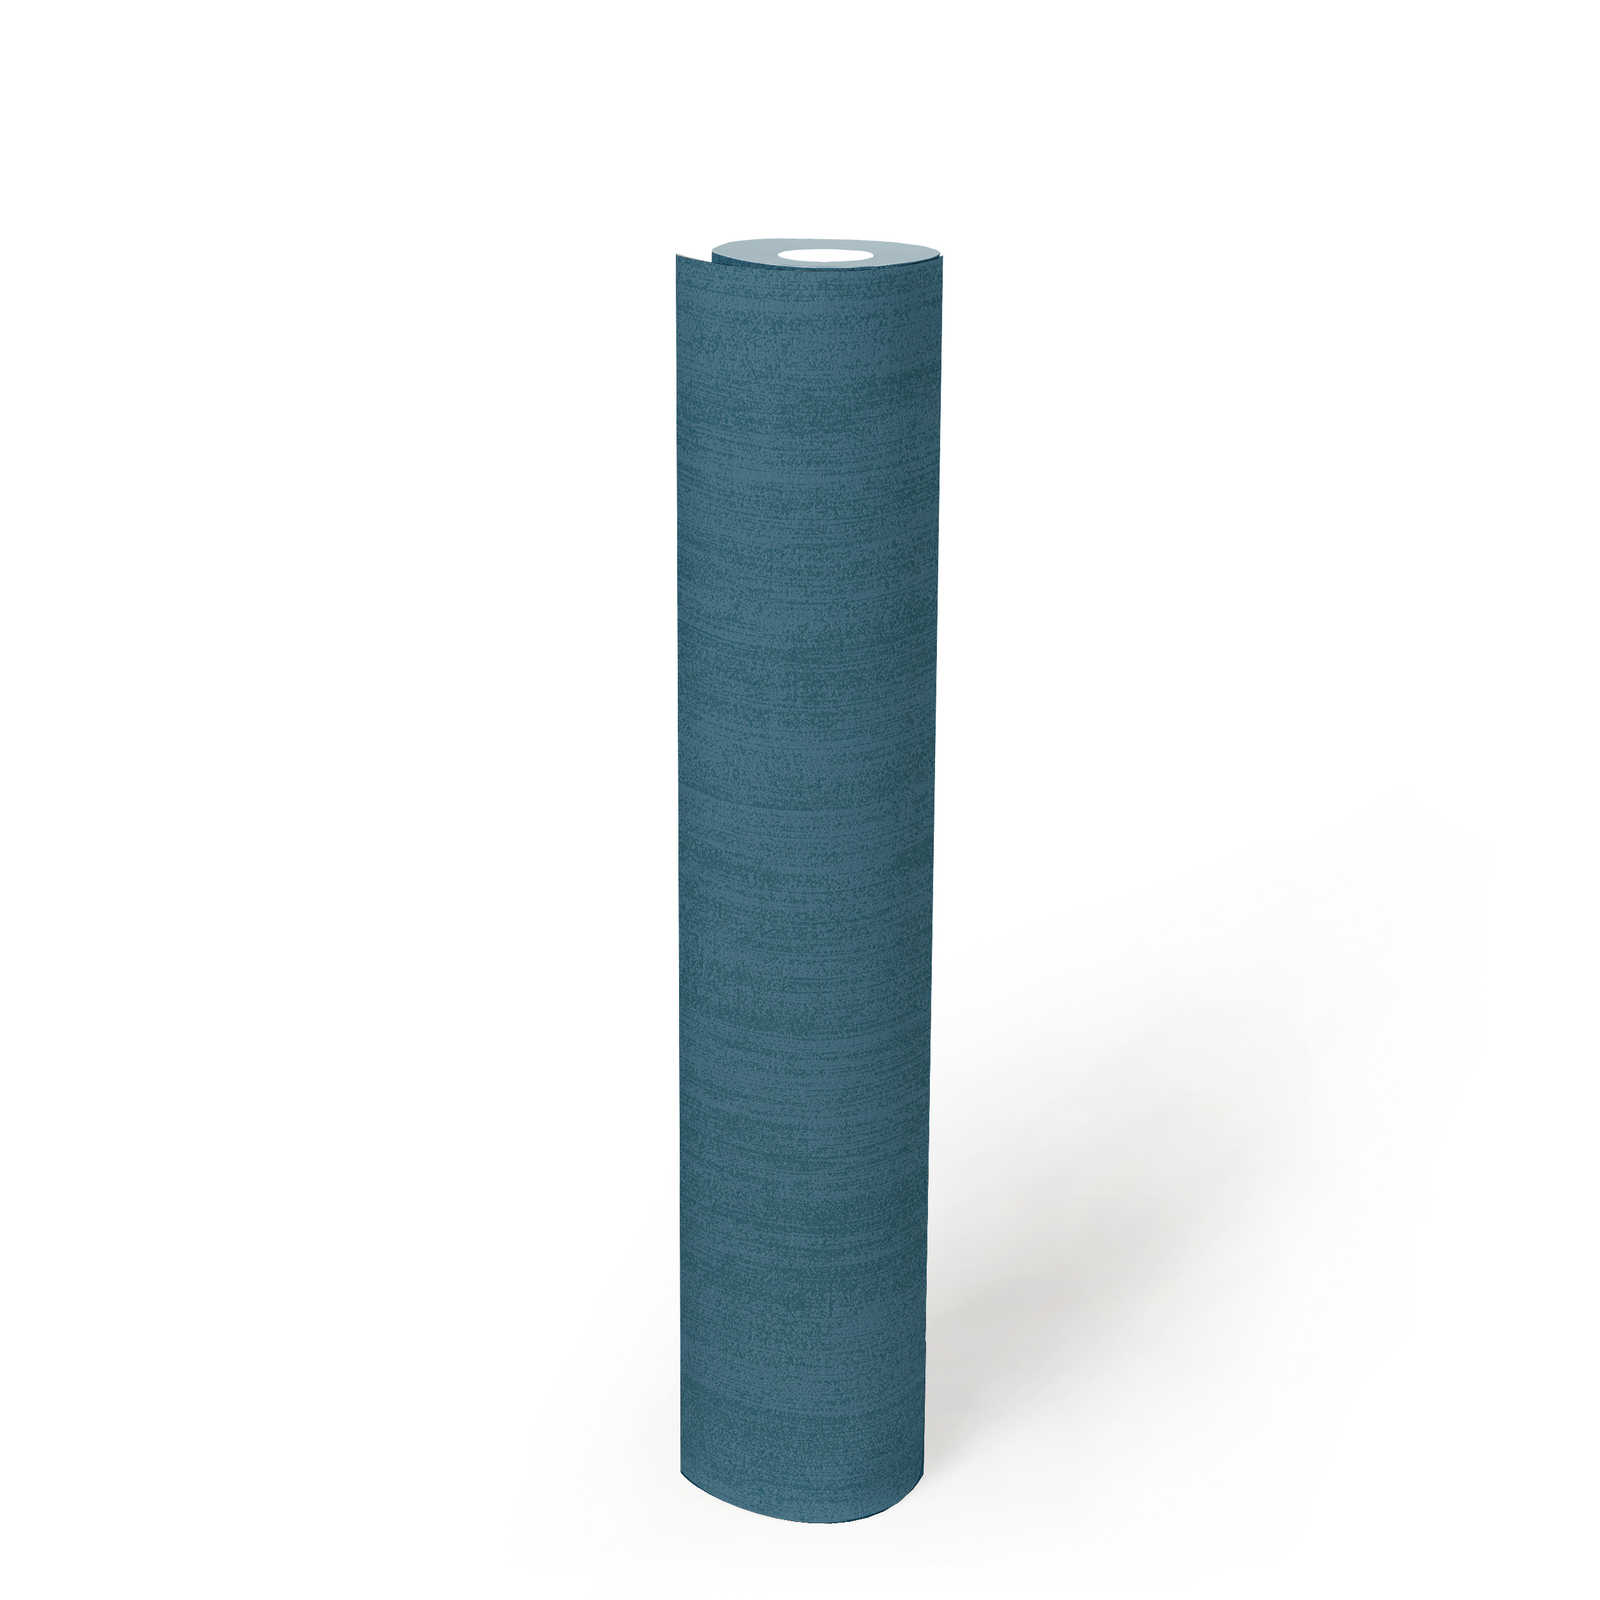             Plain non-woven wallpaper with tone-on-tone hatching - blue
        